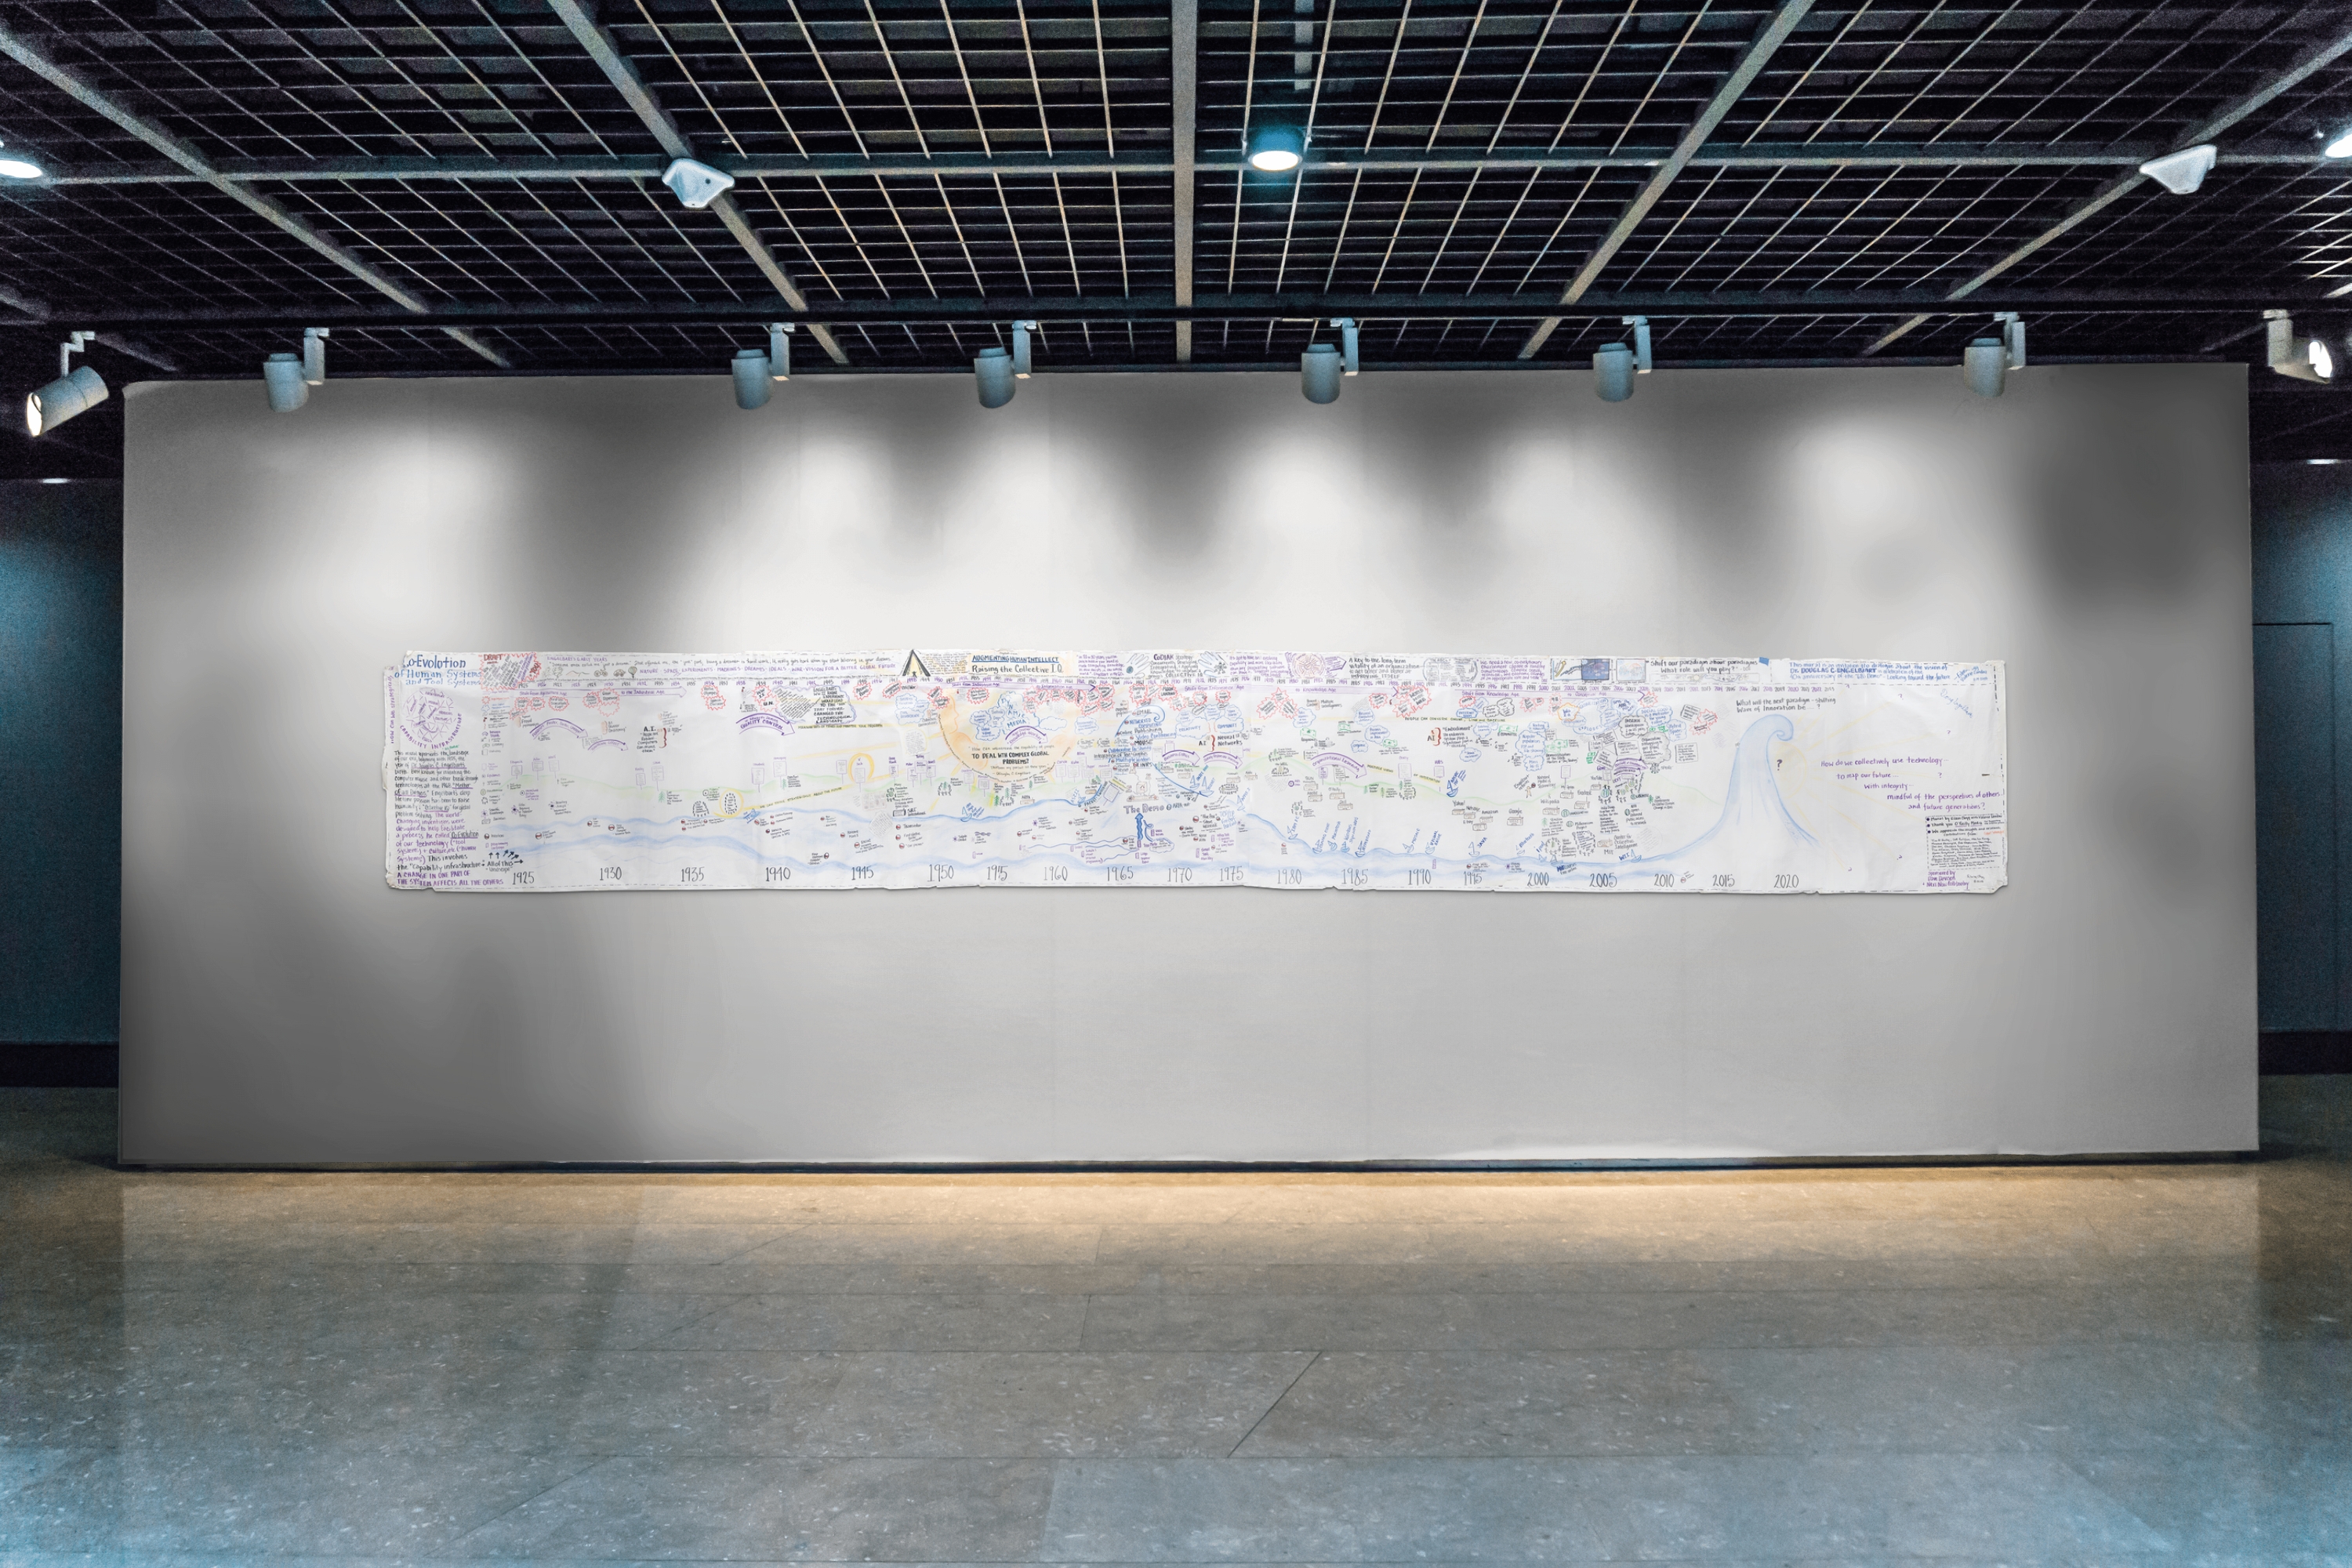 Lot #5063 Douglas Engelbart Signed and Hand-Drawn Mural: A Timeline for 'The Co-Evolution of Human and Tool Systems' - 24 Feet Long - Image 1